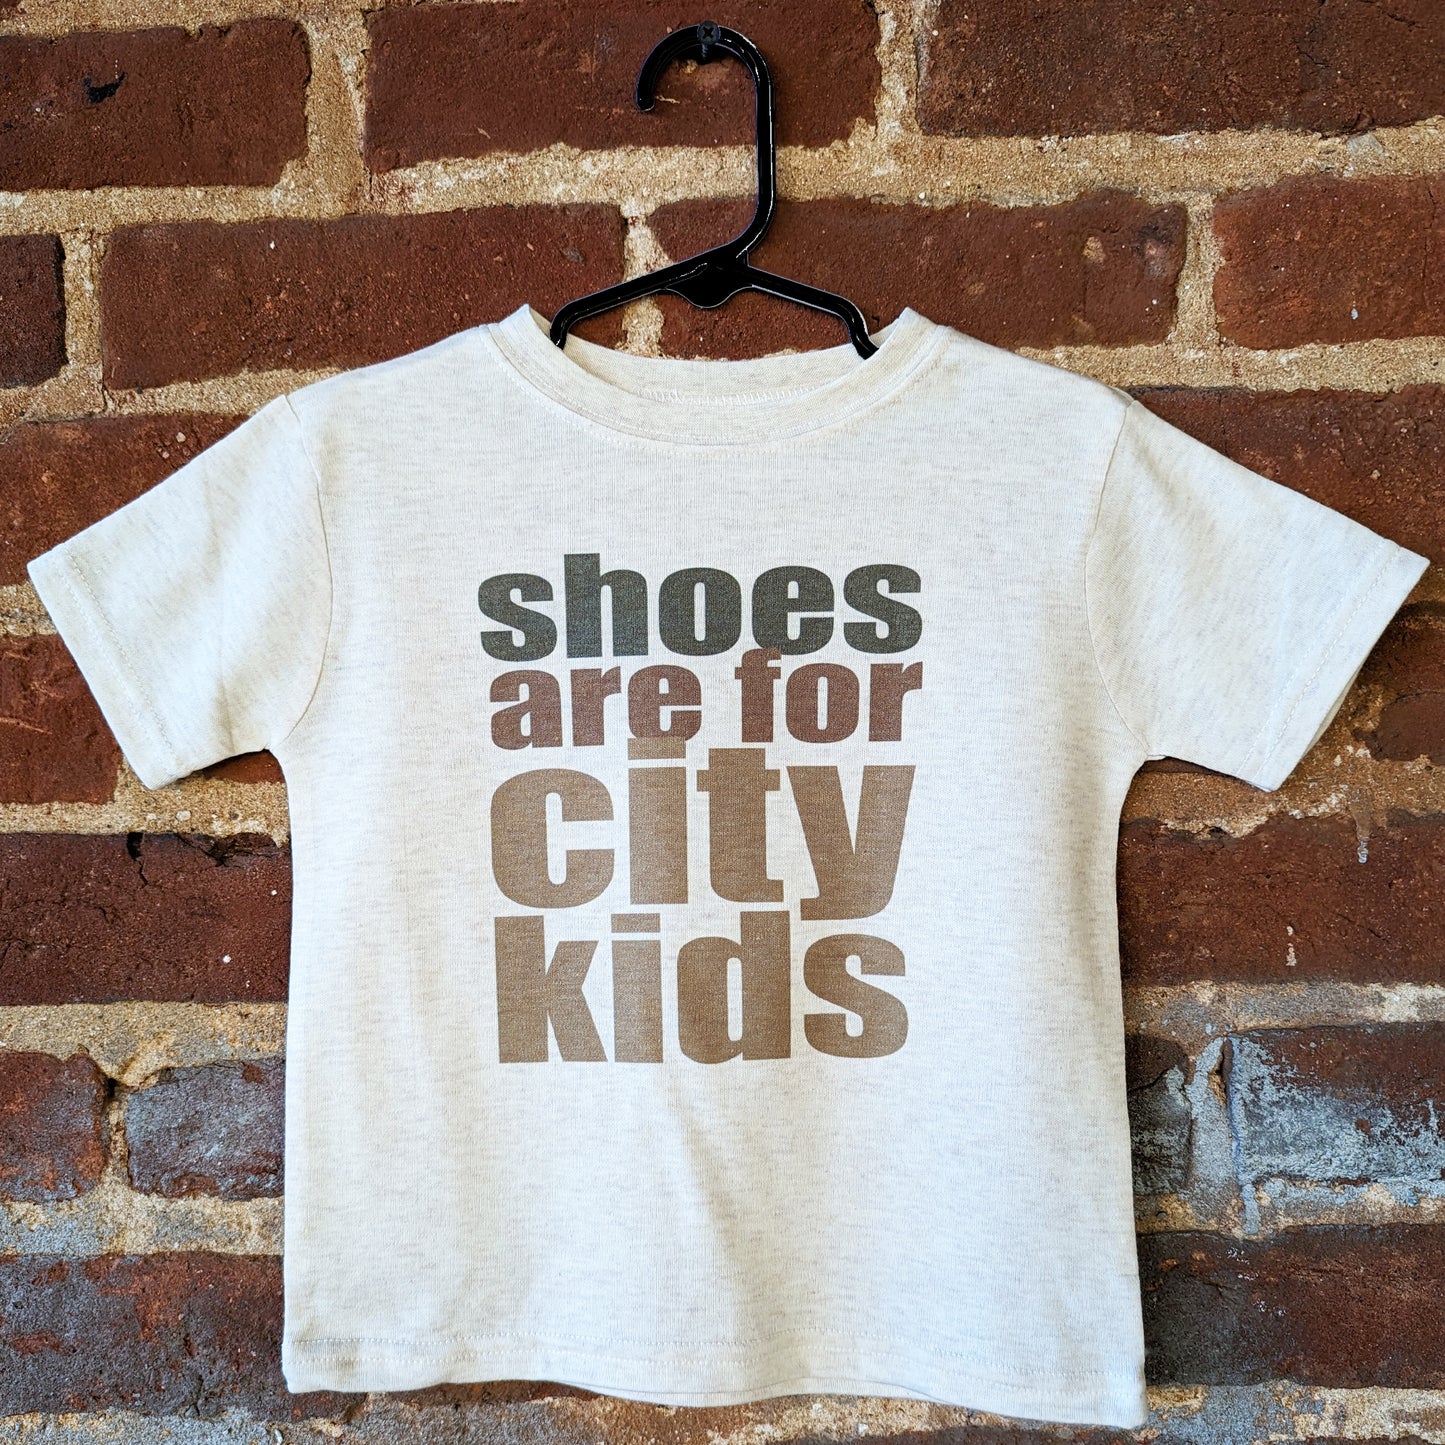 "Shoes are for city kids" Unisex Barefoot Baby tee